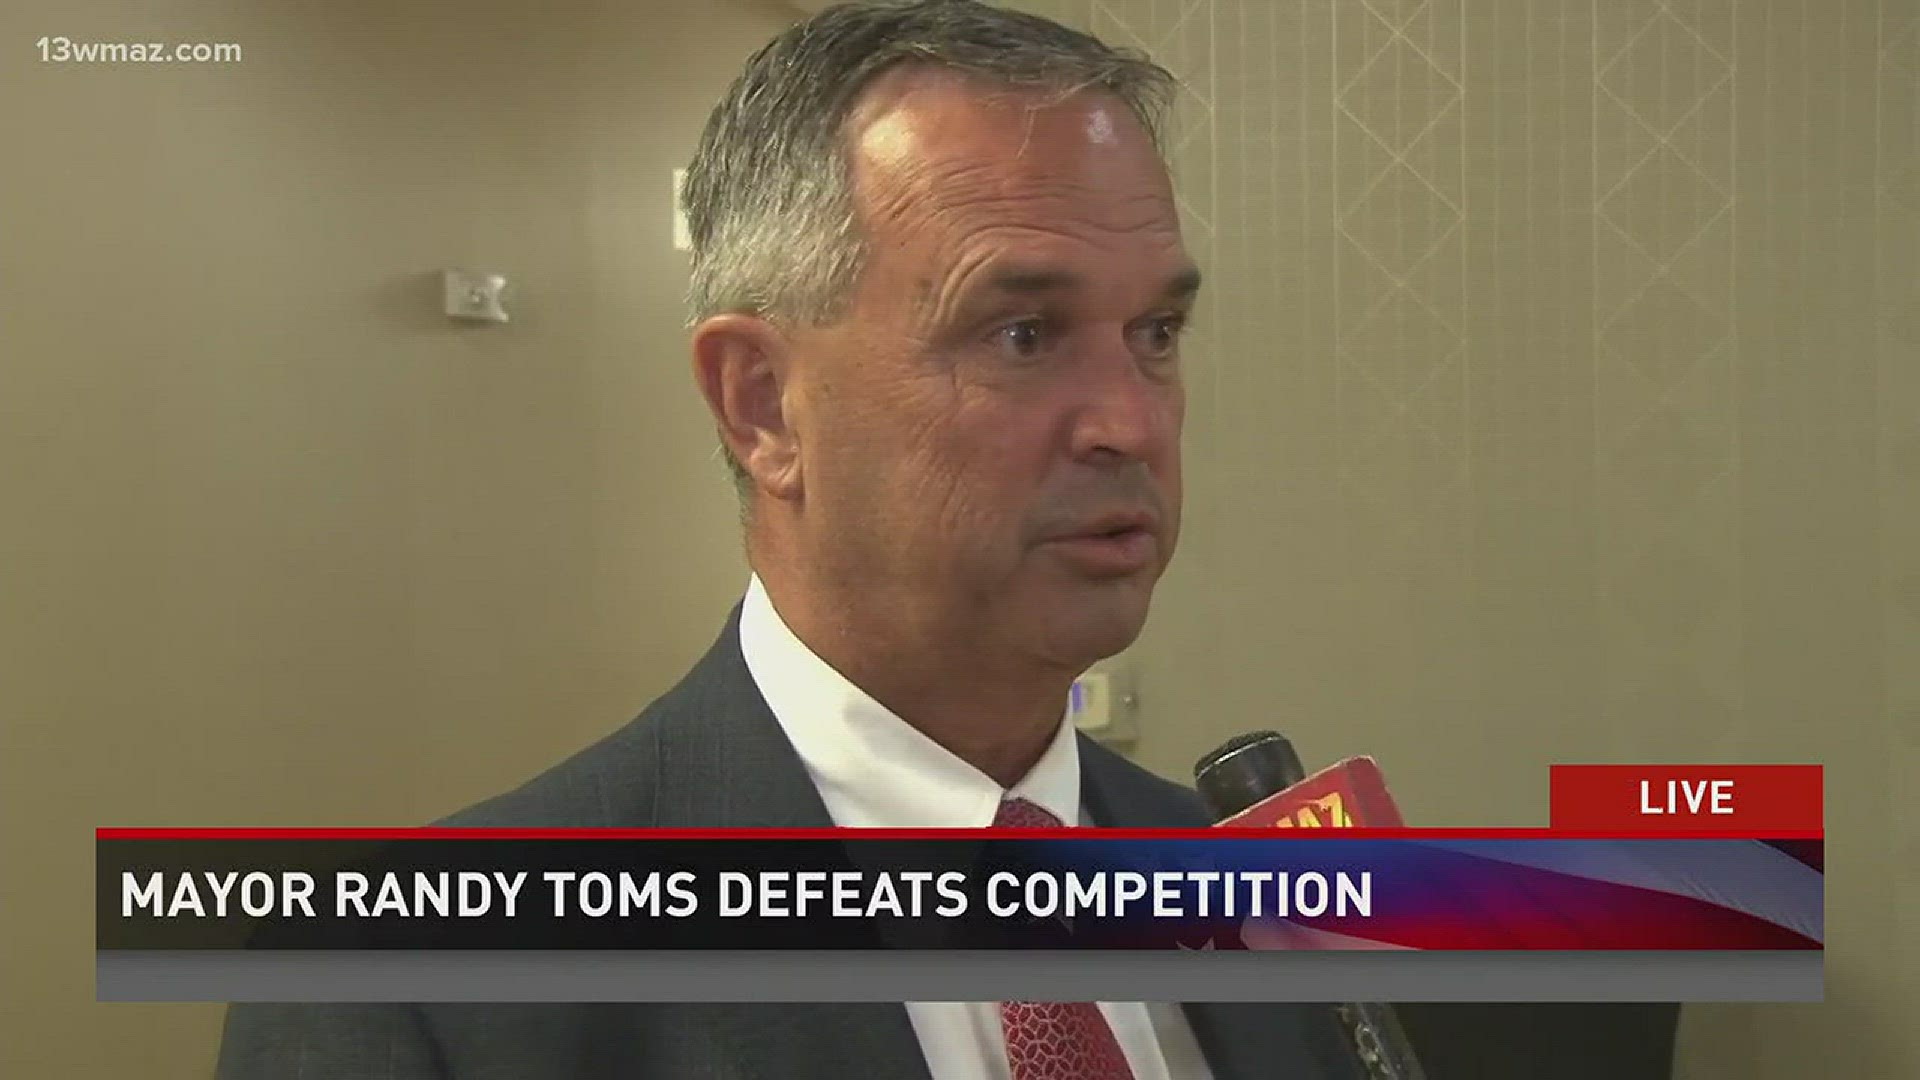 Mayor Randy Toms defeats competition